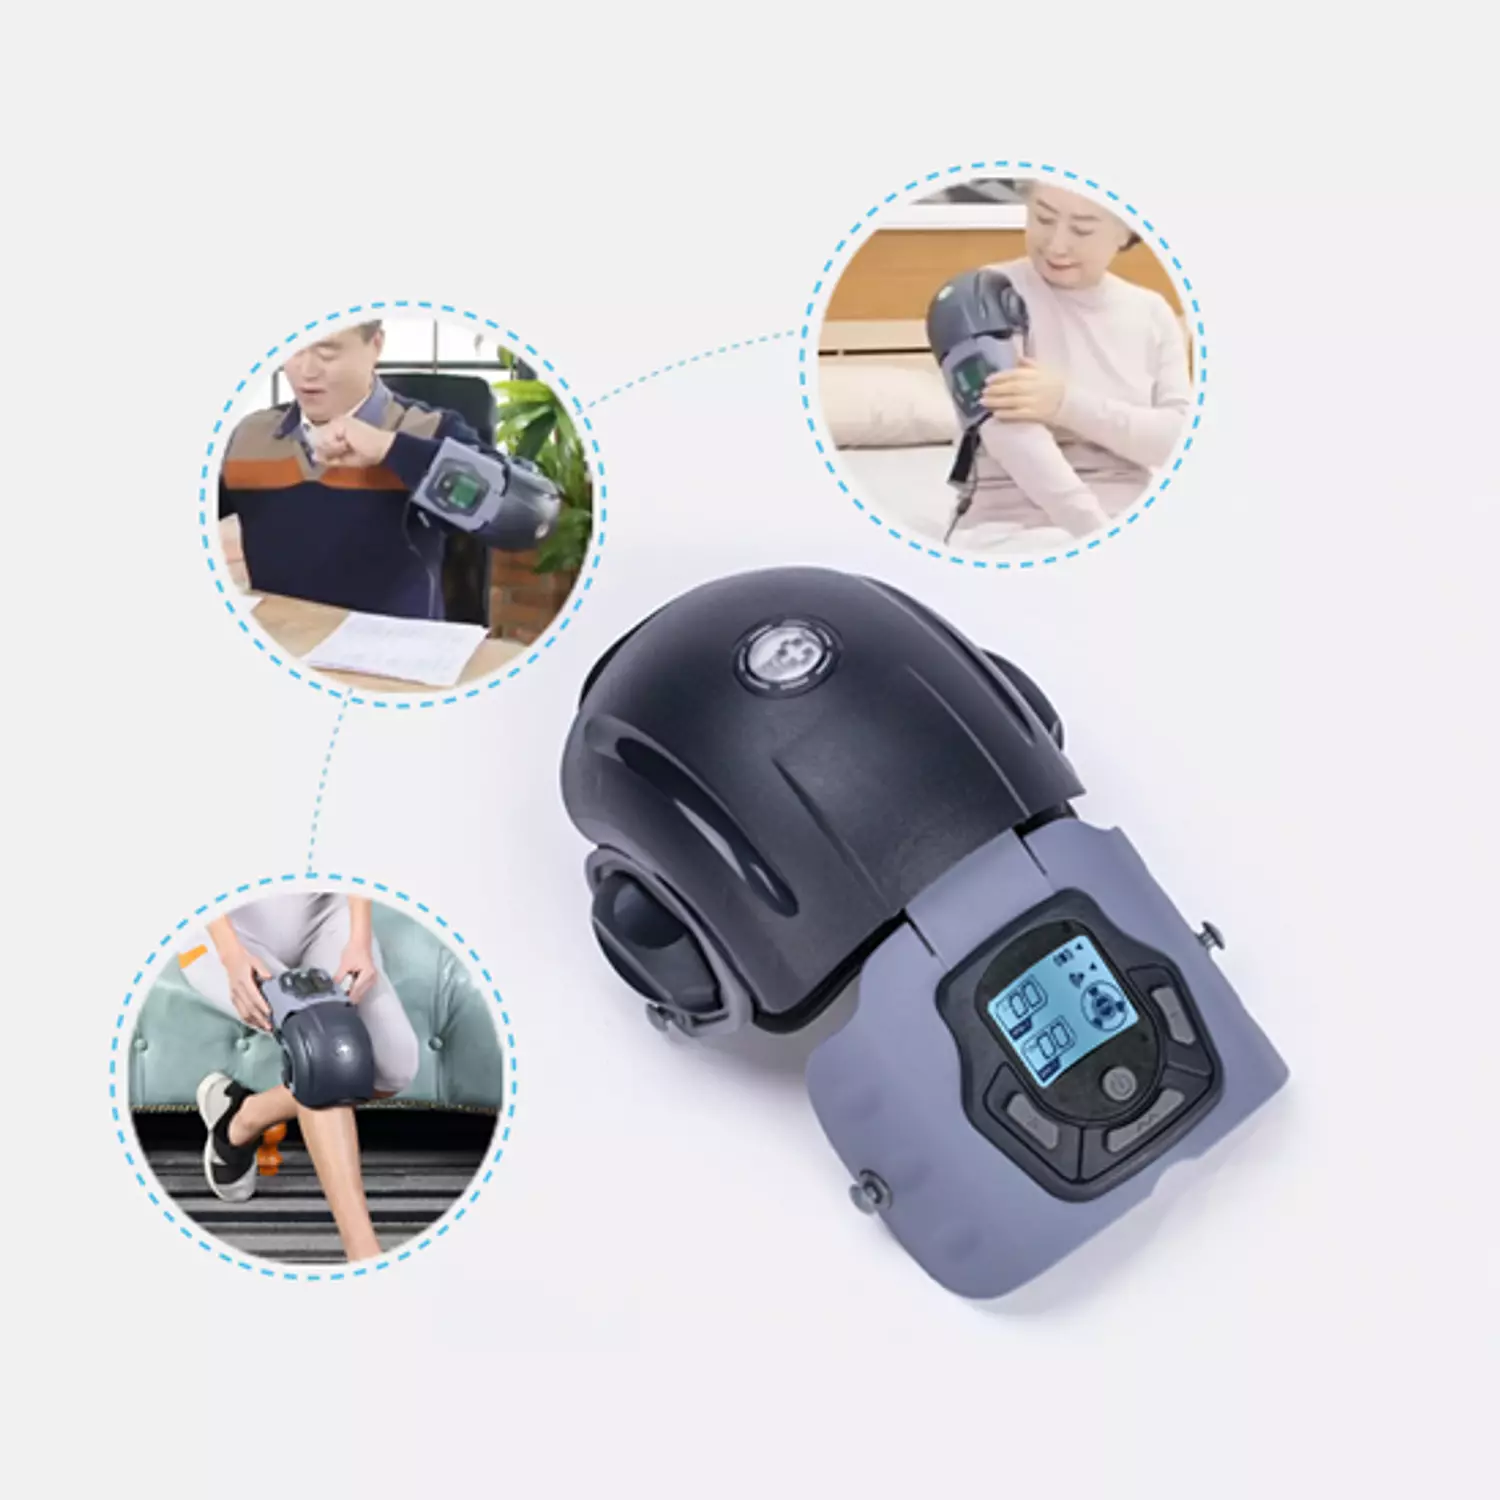 Thermal Frequency Joint and Knee Rehabilitation Device for Pain Relief-2nd-img